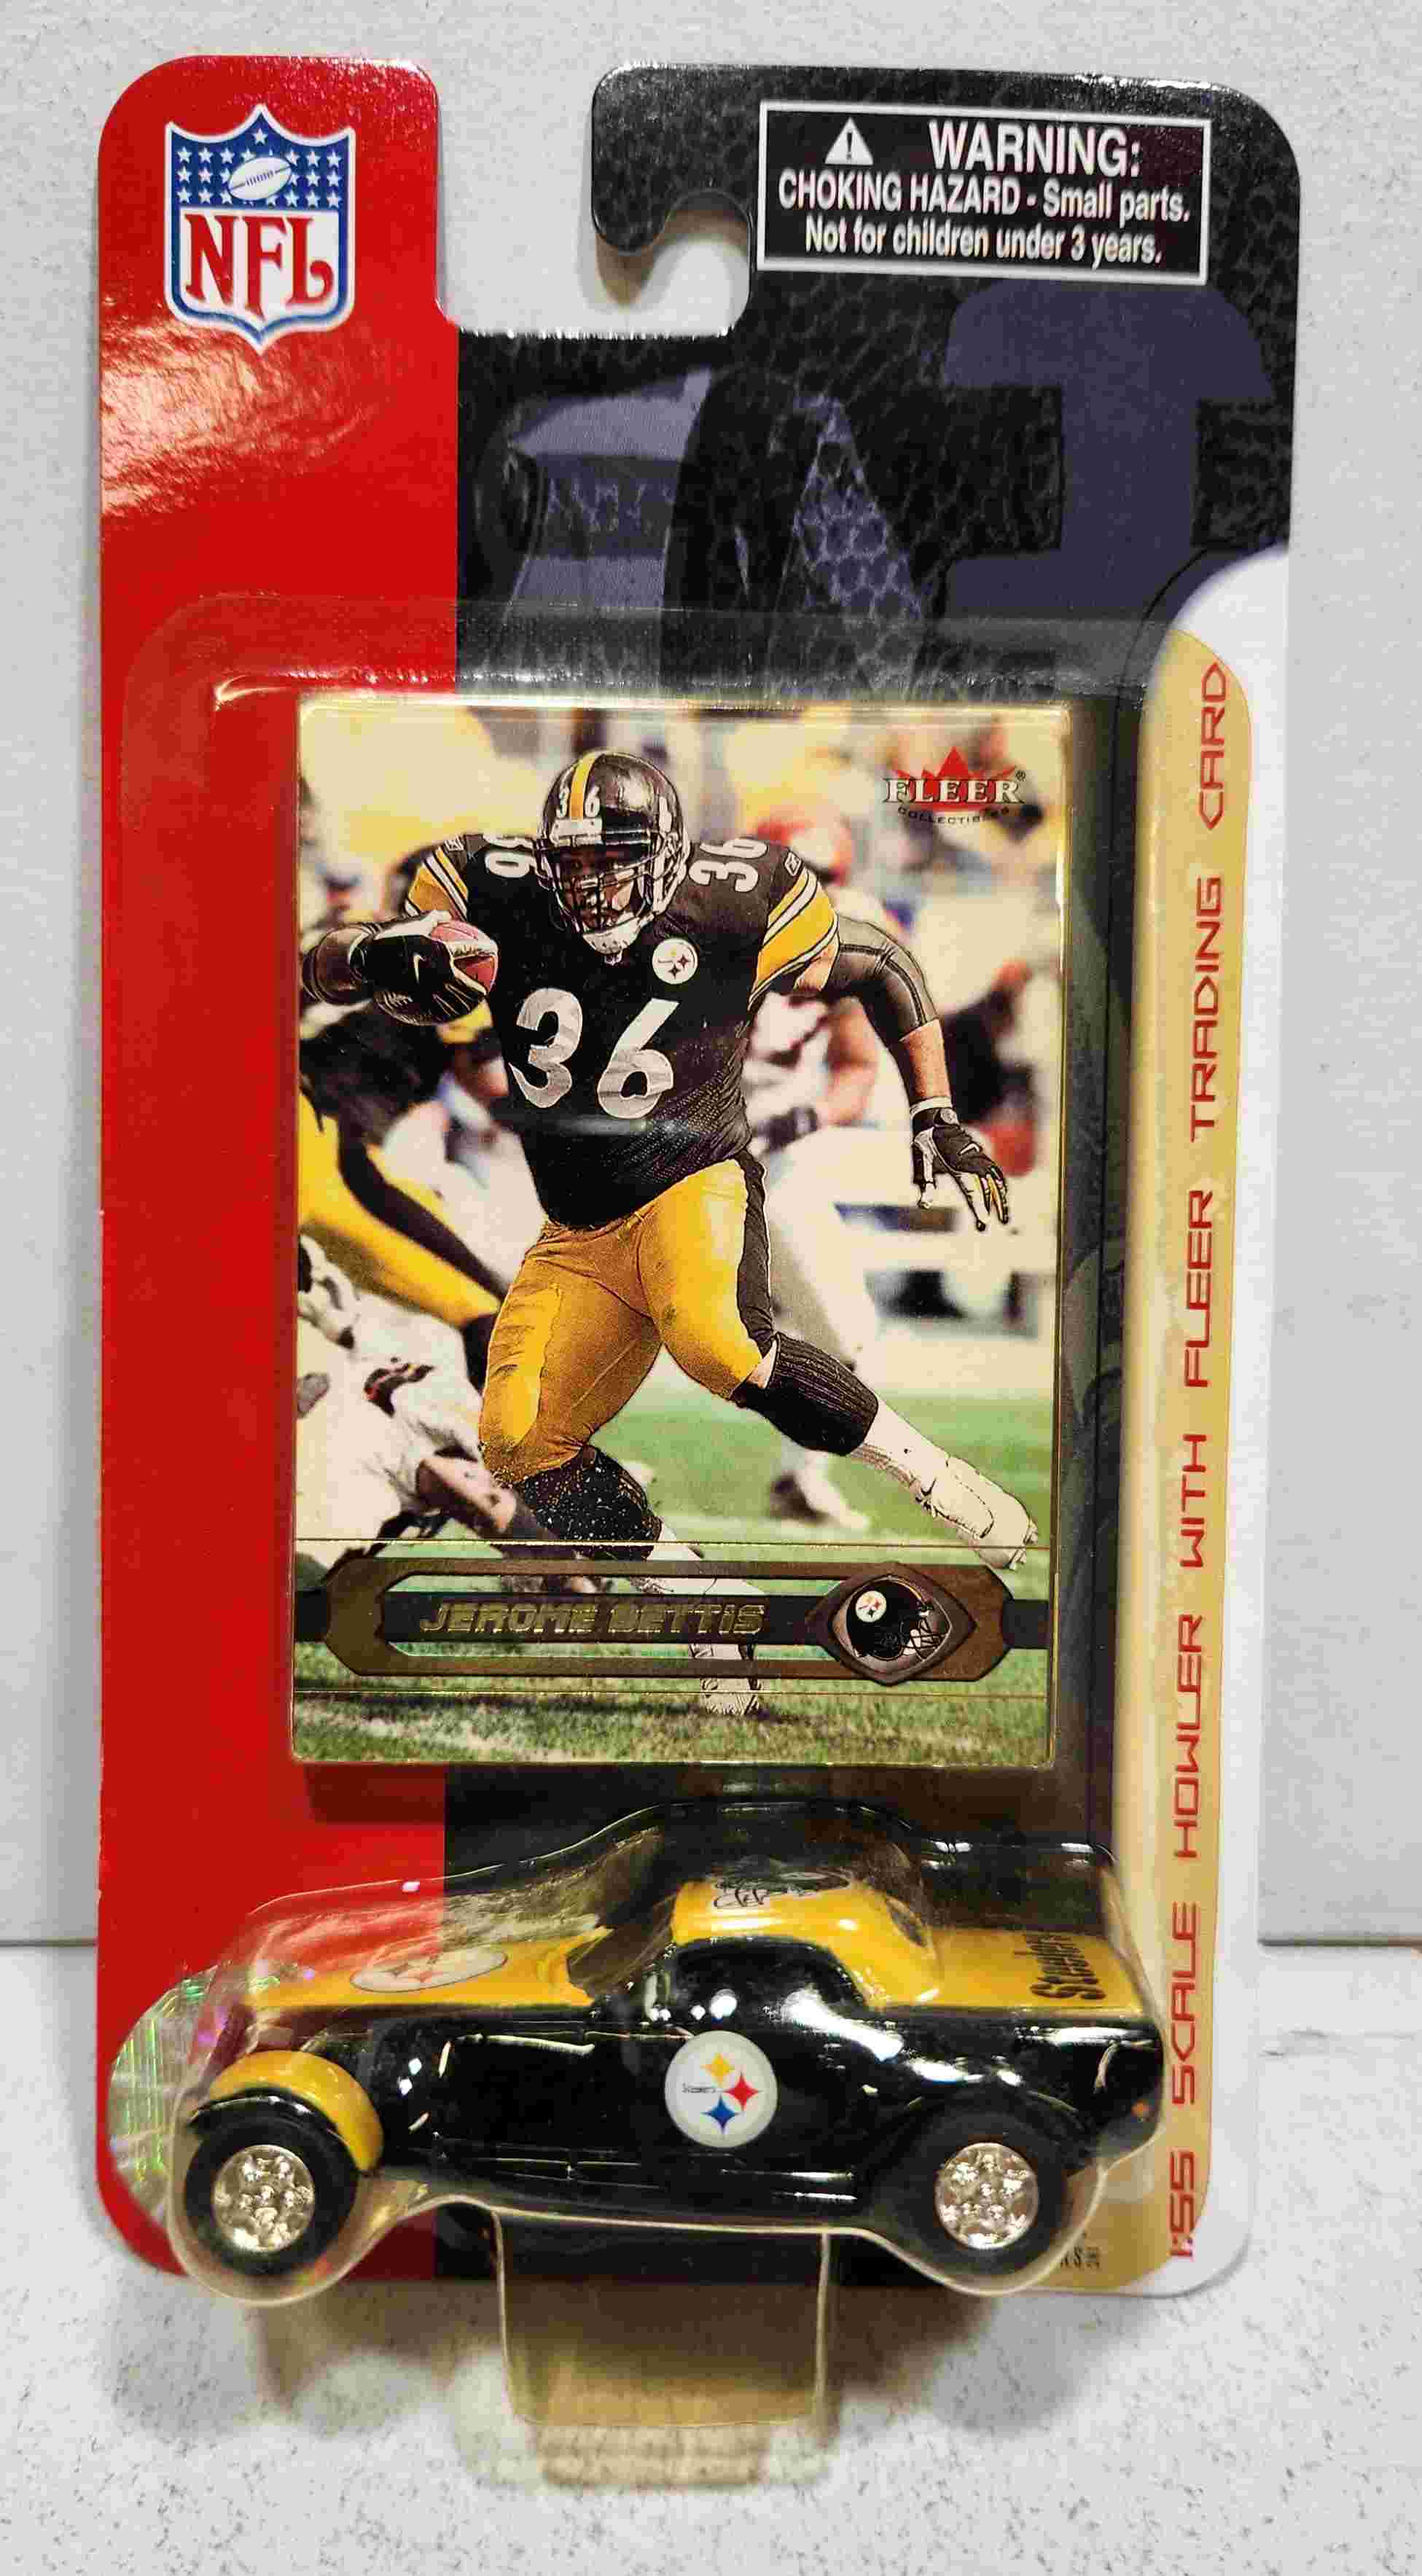 2002 Pittsburgh Steelers 1/55th Chrysler Howler with Jerome Bettis trading card